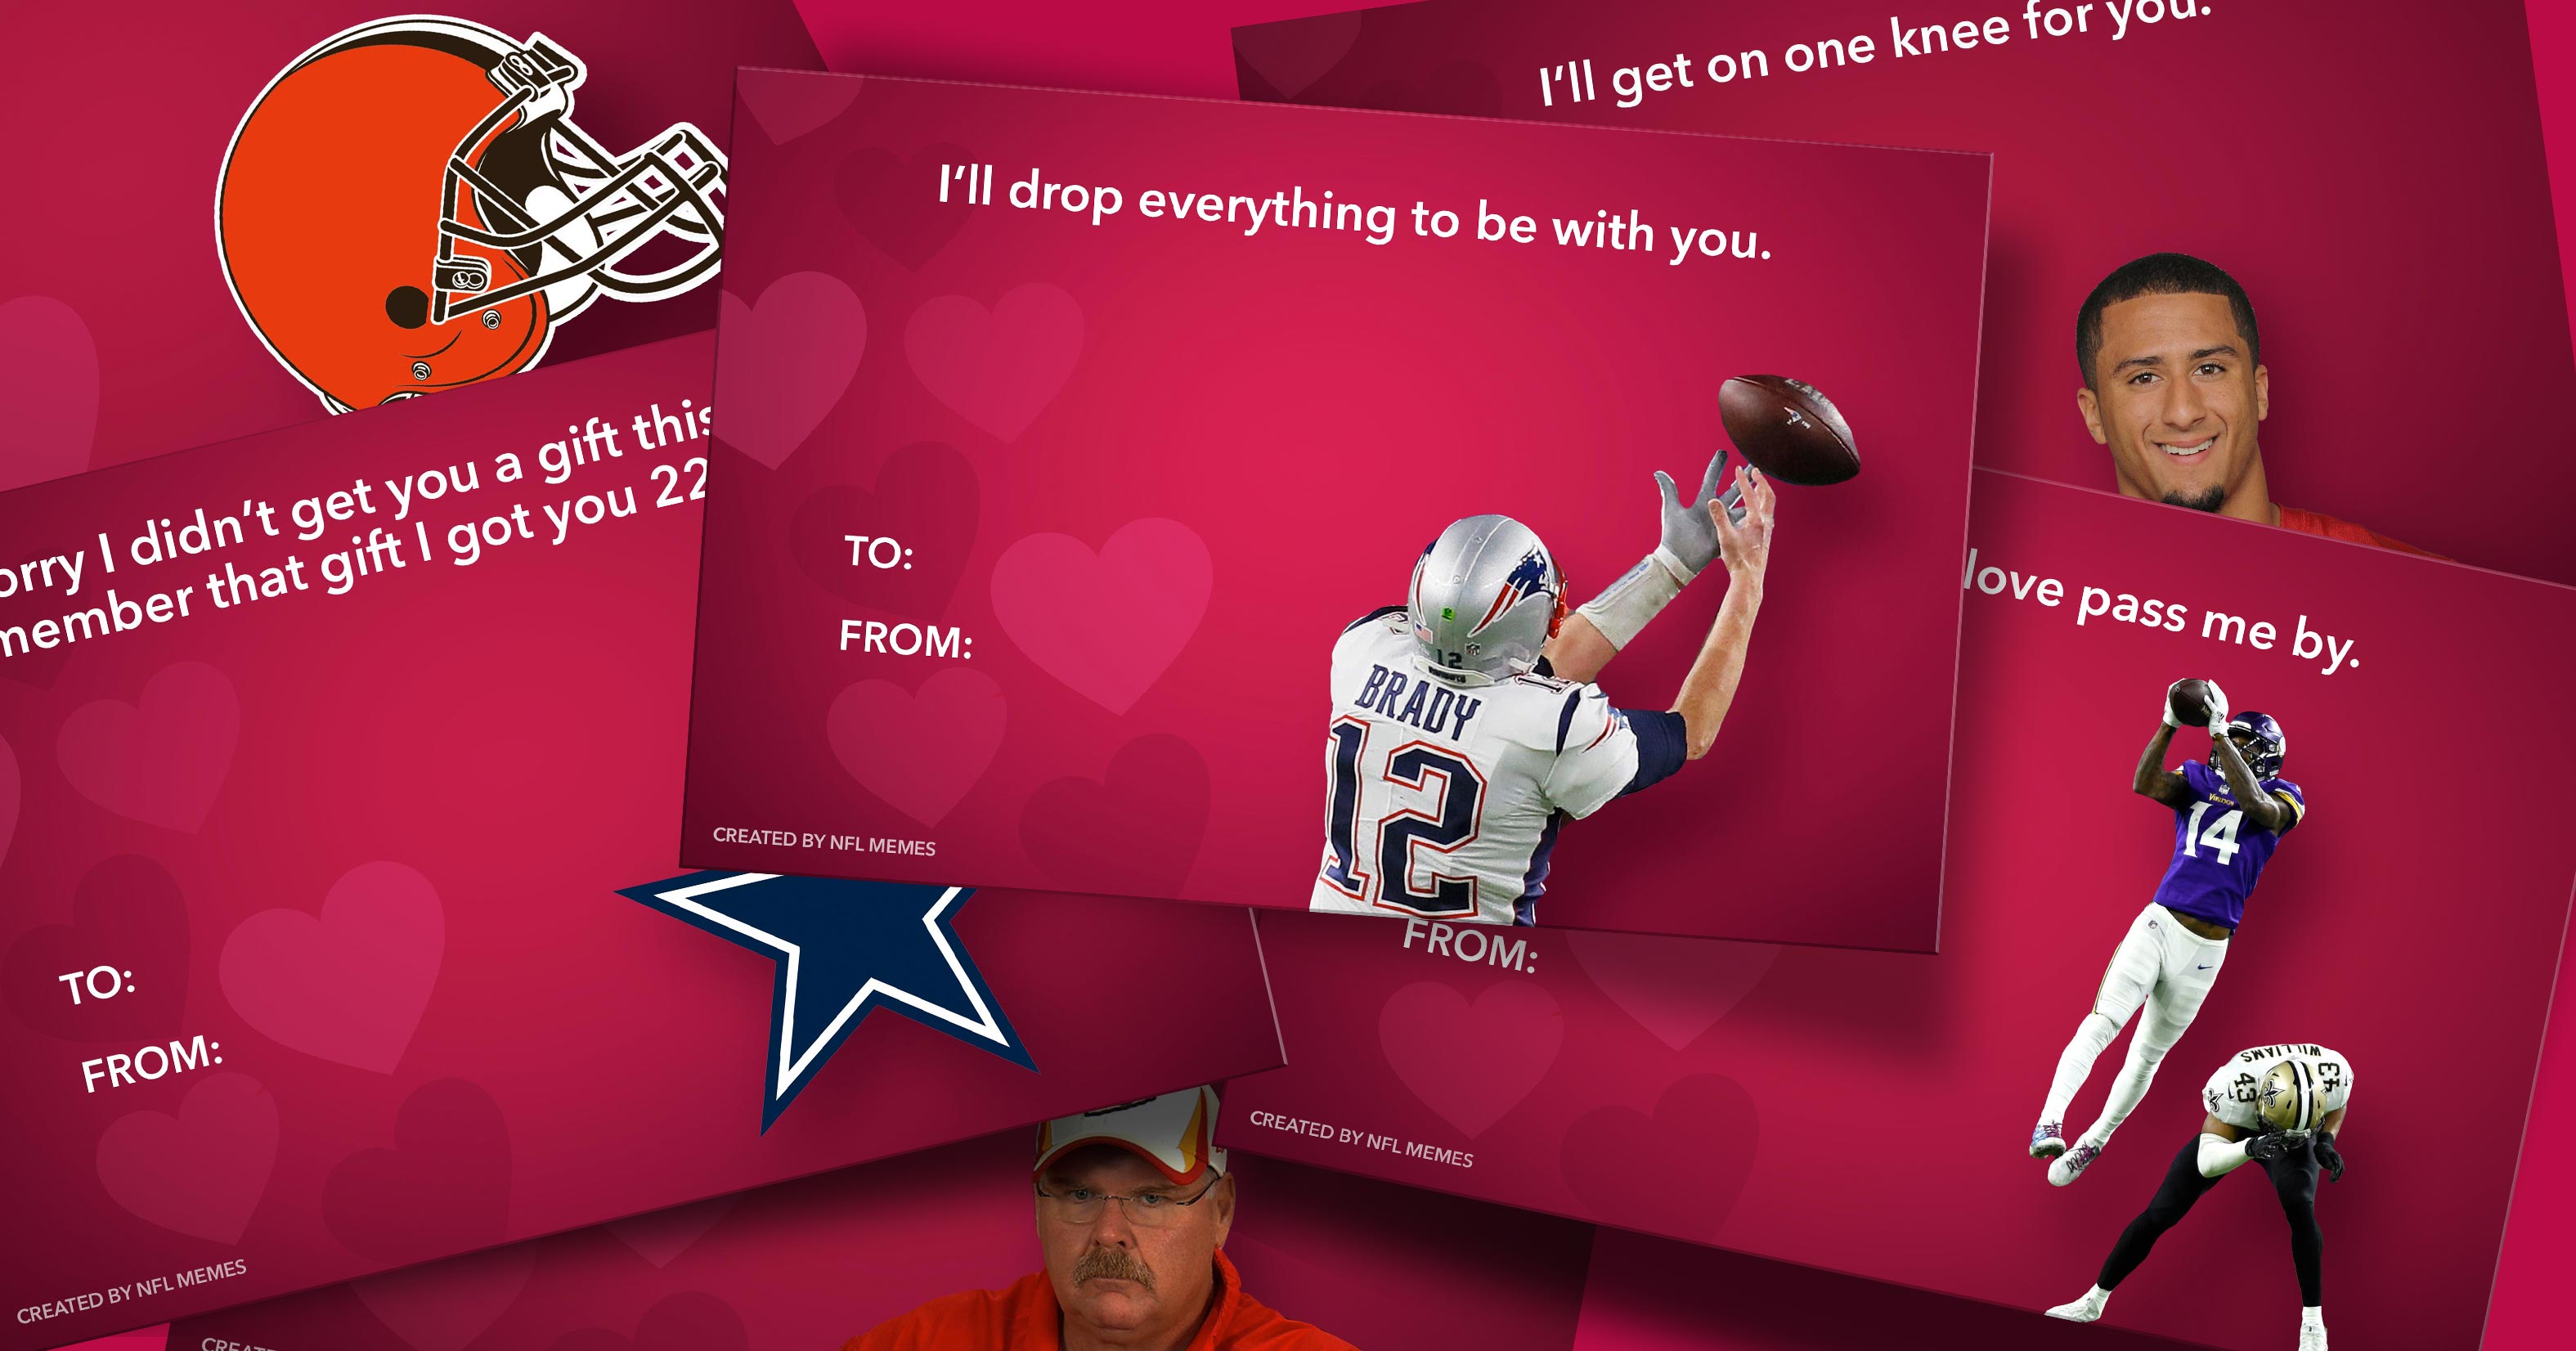 Here’s This Year’s Batch Of Hilarious NFL-Themed Valentine’s Day Cards (PICS)3150 x 1652